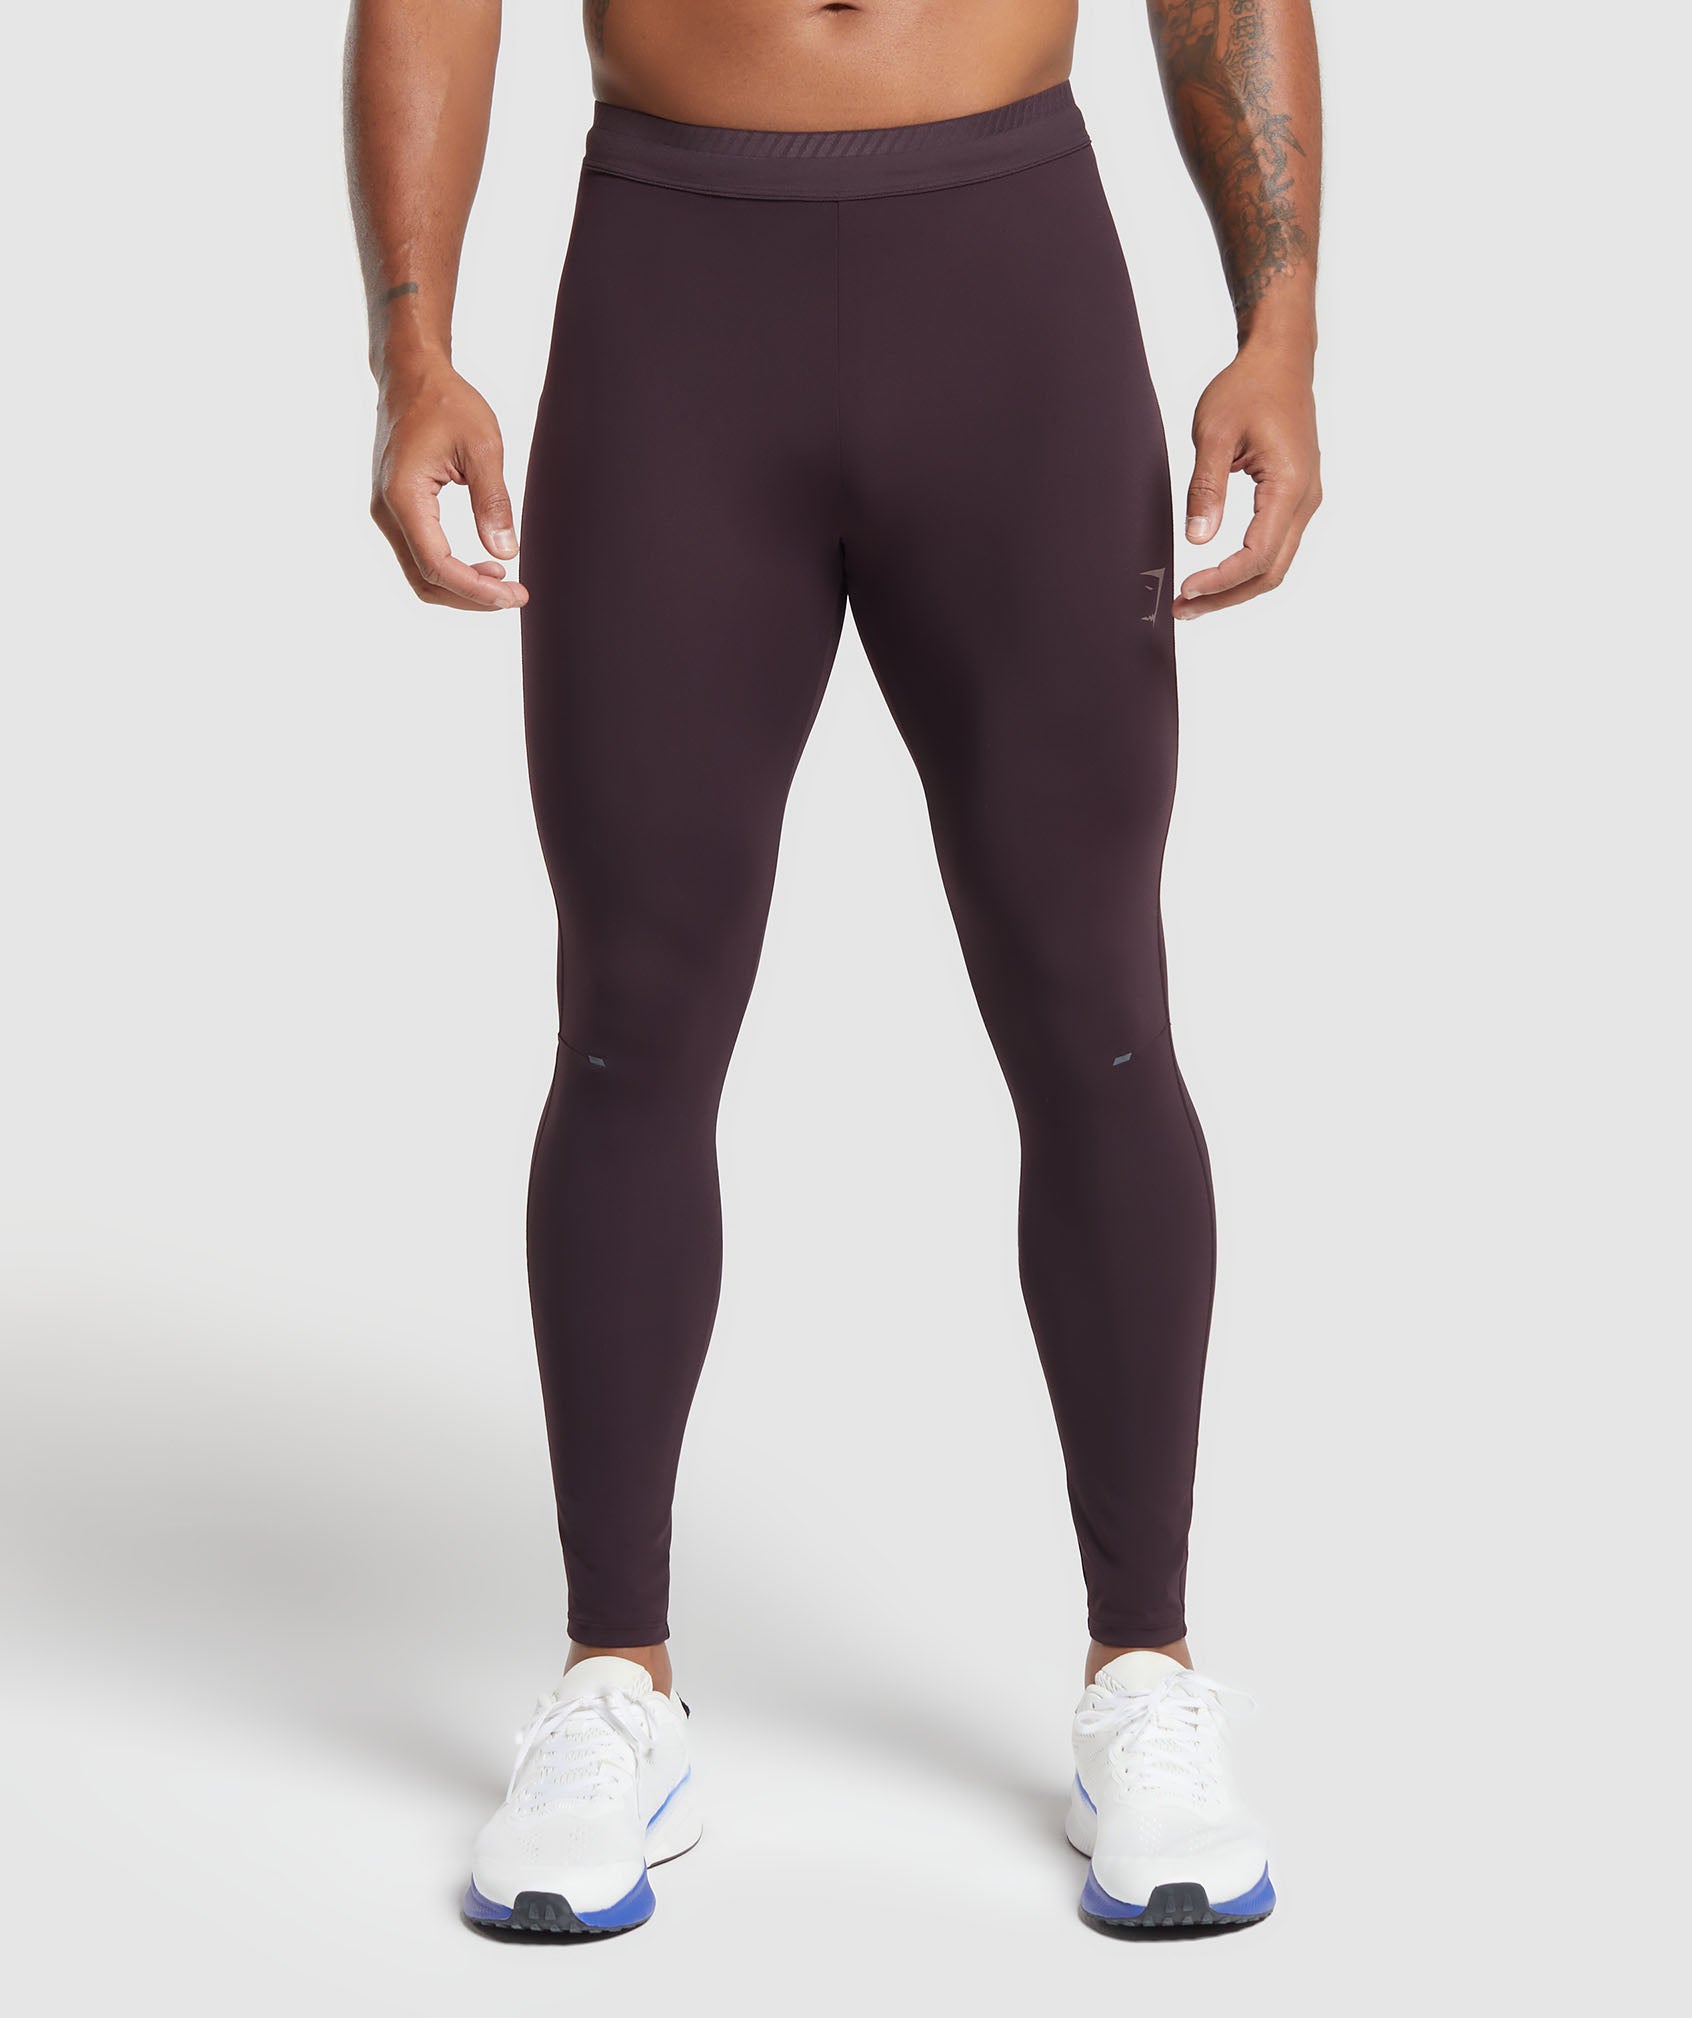 Men's Running Leggings & Tights - Run and Become